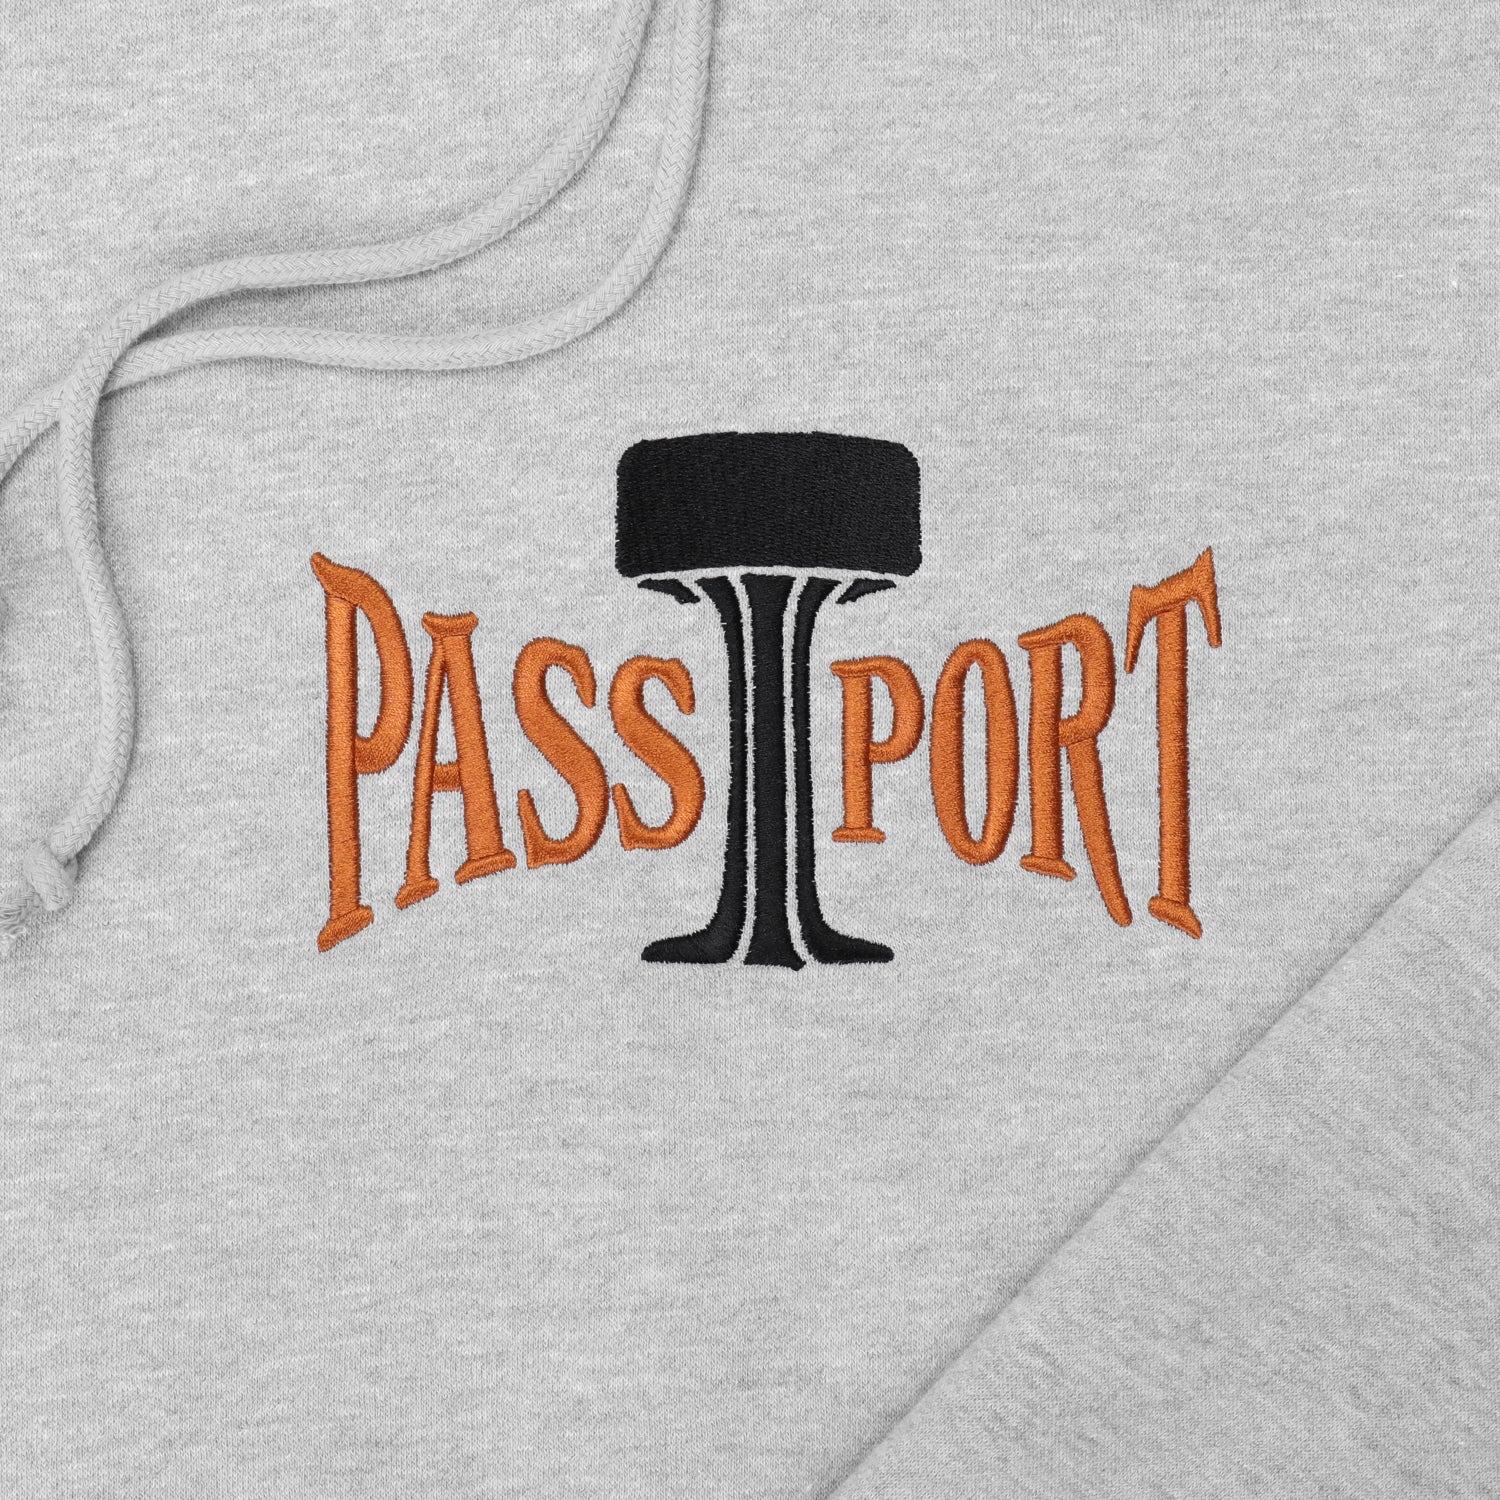 Pass~Port Towers of Water Hoodie - Ash